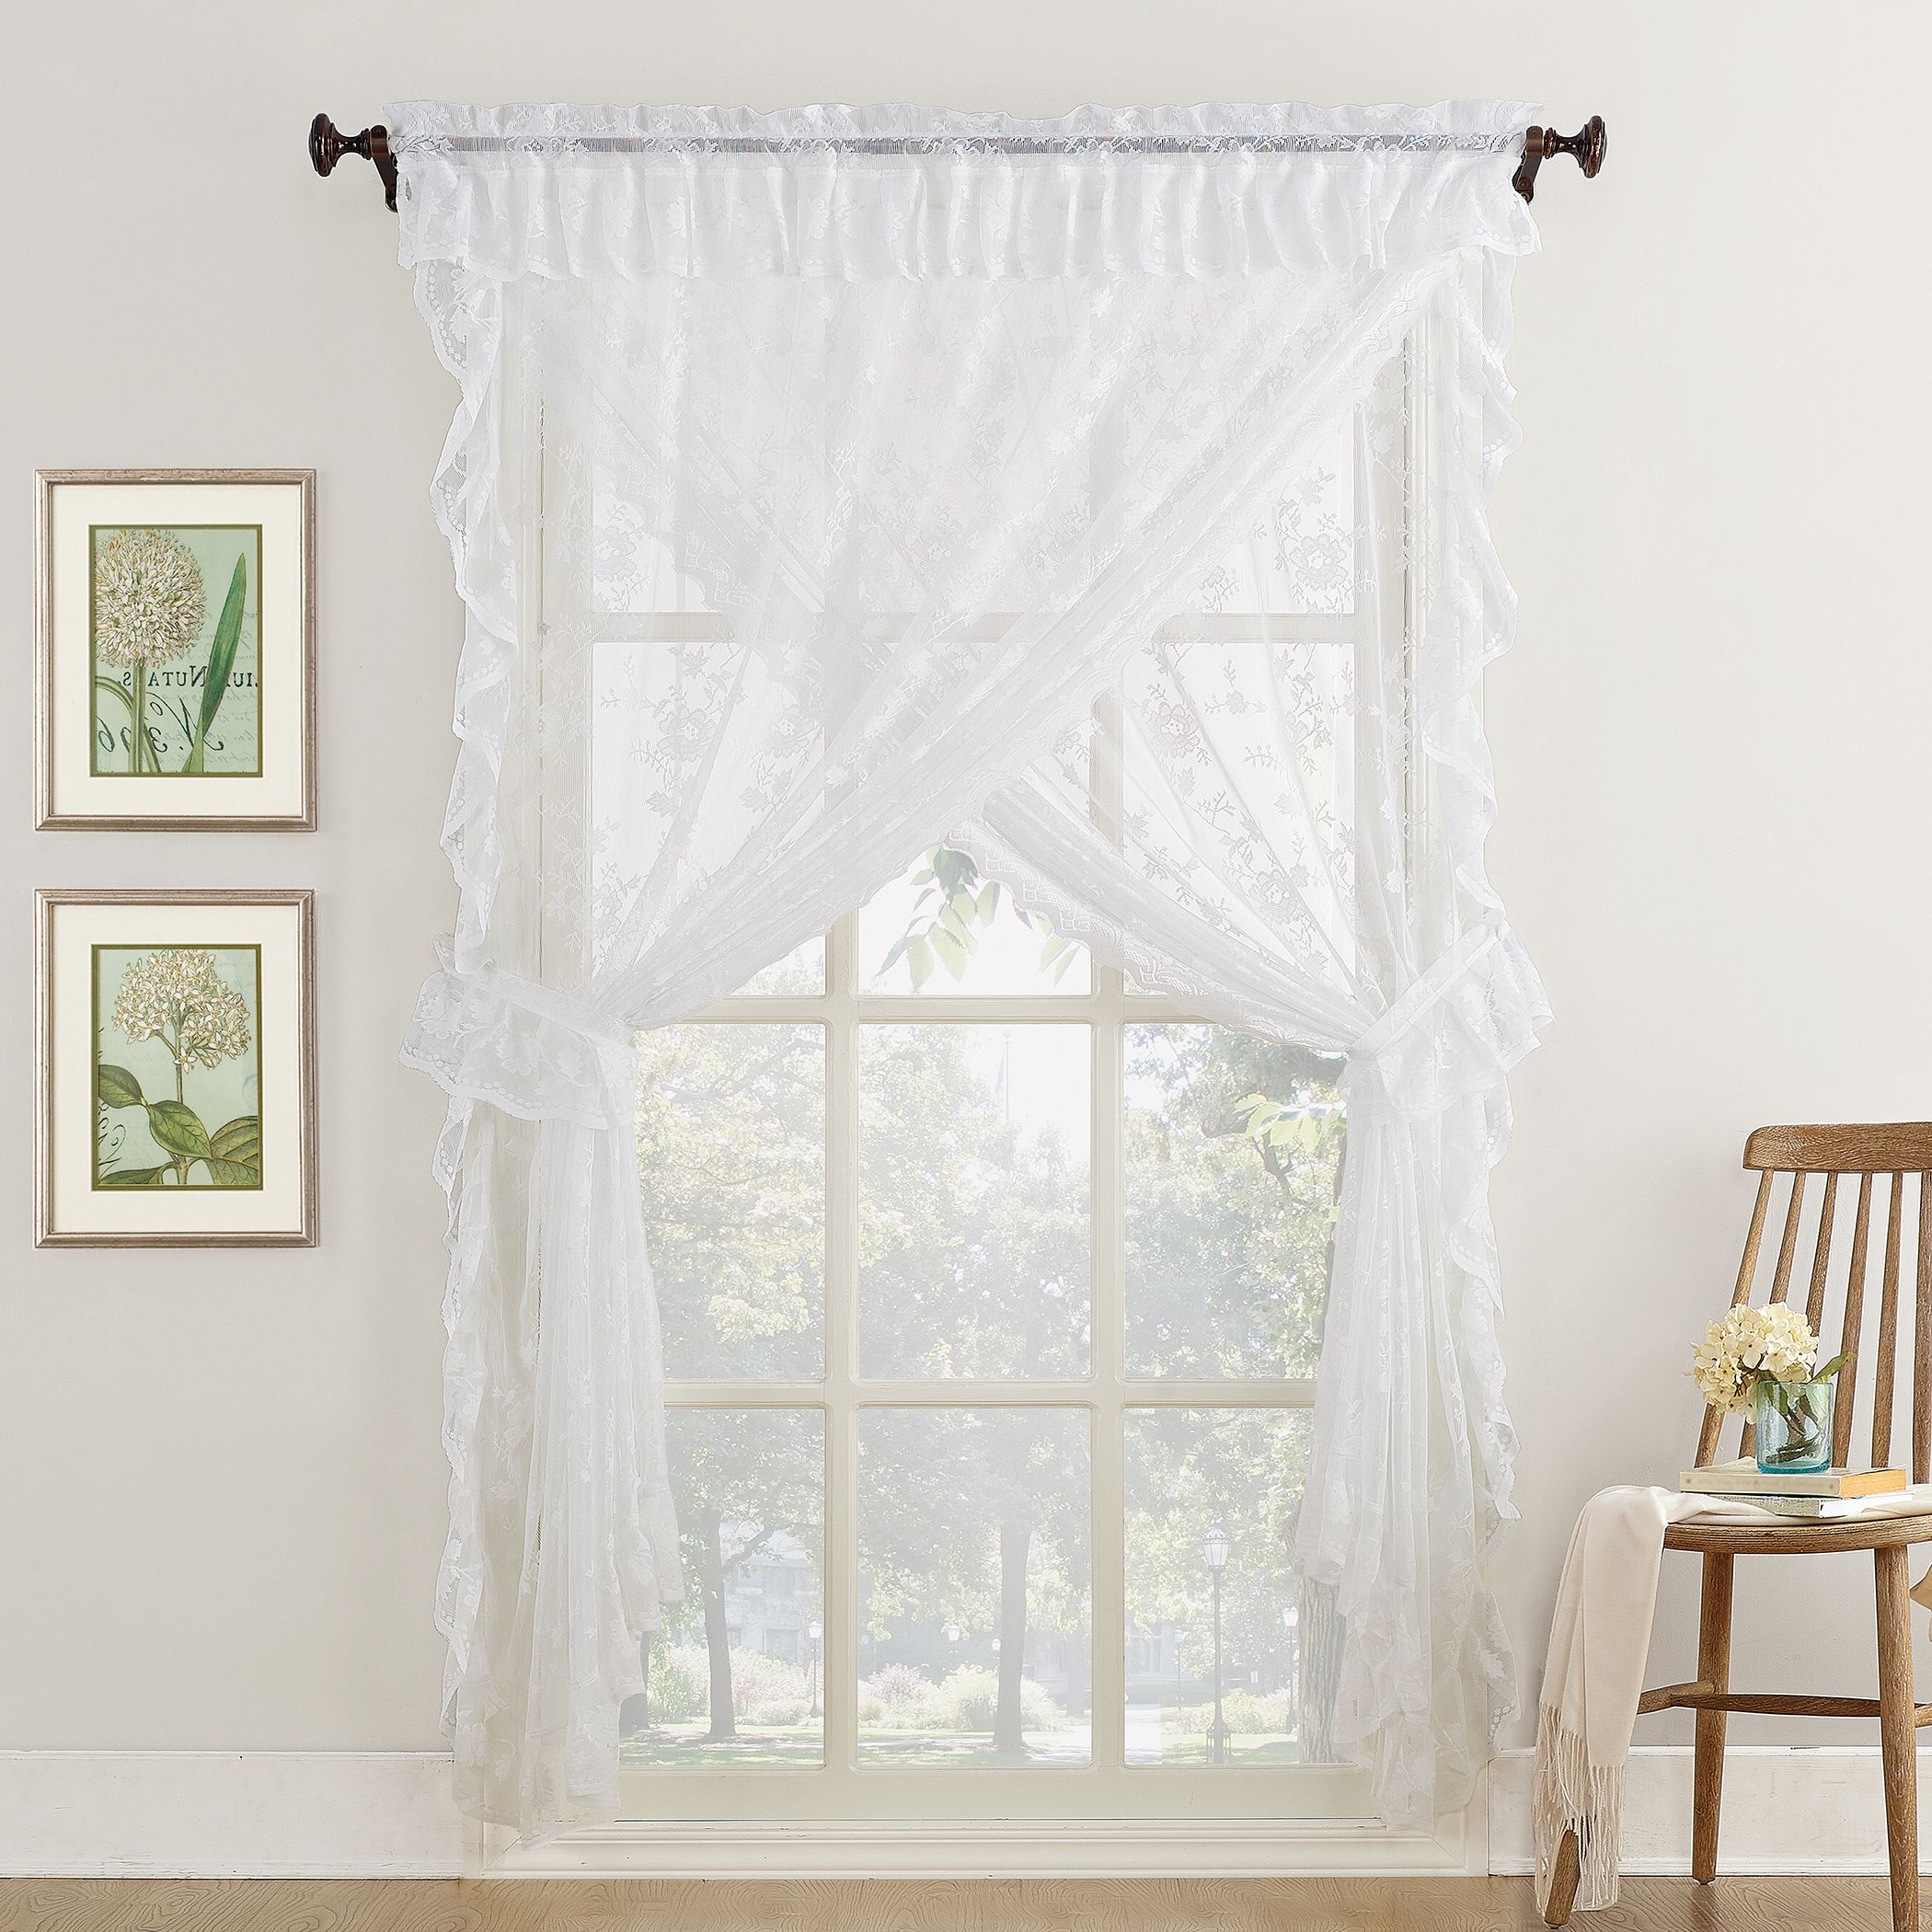 Favorite White Micro Striped Semi Sheer Window Curtain Pieces In Alison Ruffled Floral Lace Sheer Priscilla 5pc Curtain Set (View 19 of 20)